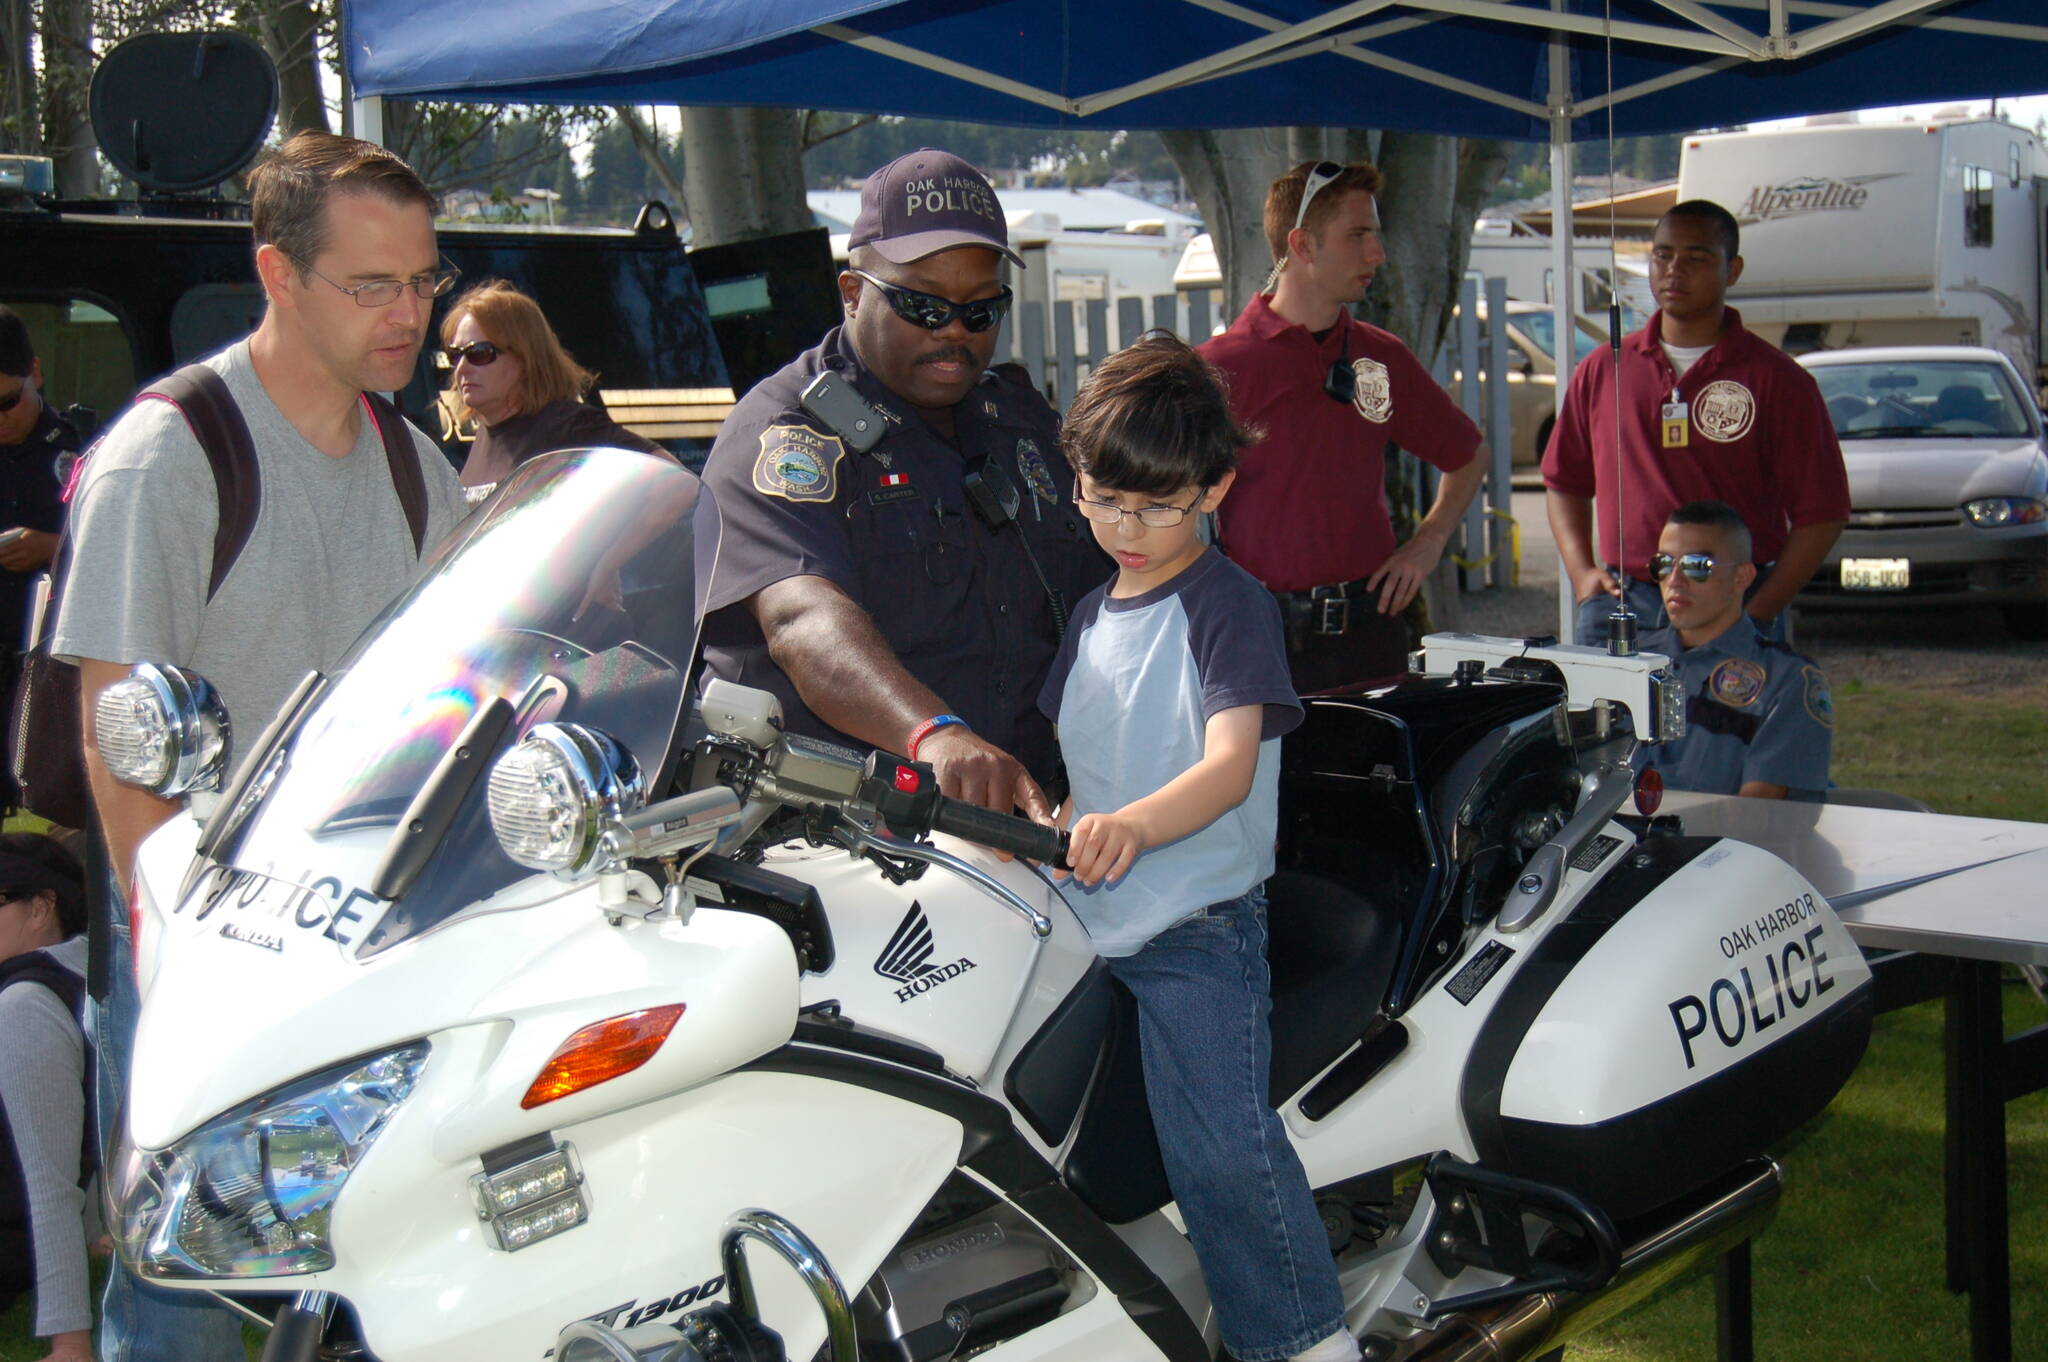 National Night Out has been happening in Oak Harbor for many years. A child gets to see a police motorcycle up close in this photo from 2011. (Photo provided by Oak Harbor Police Department)